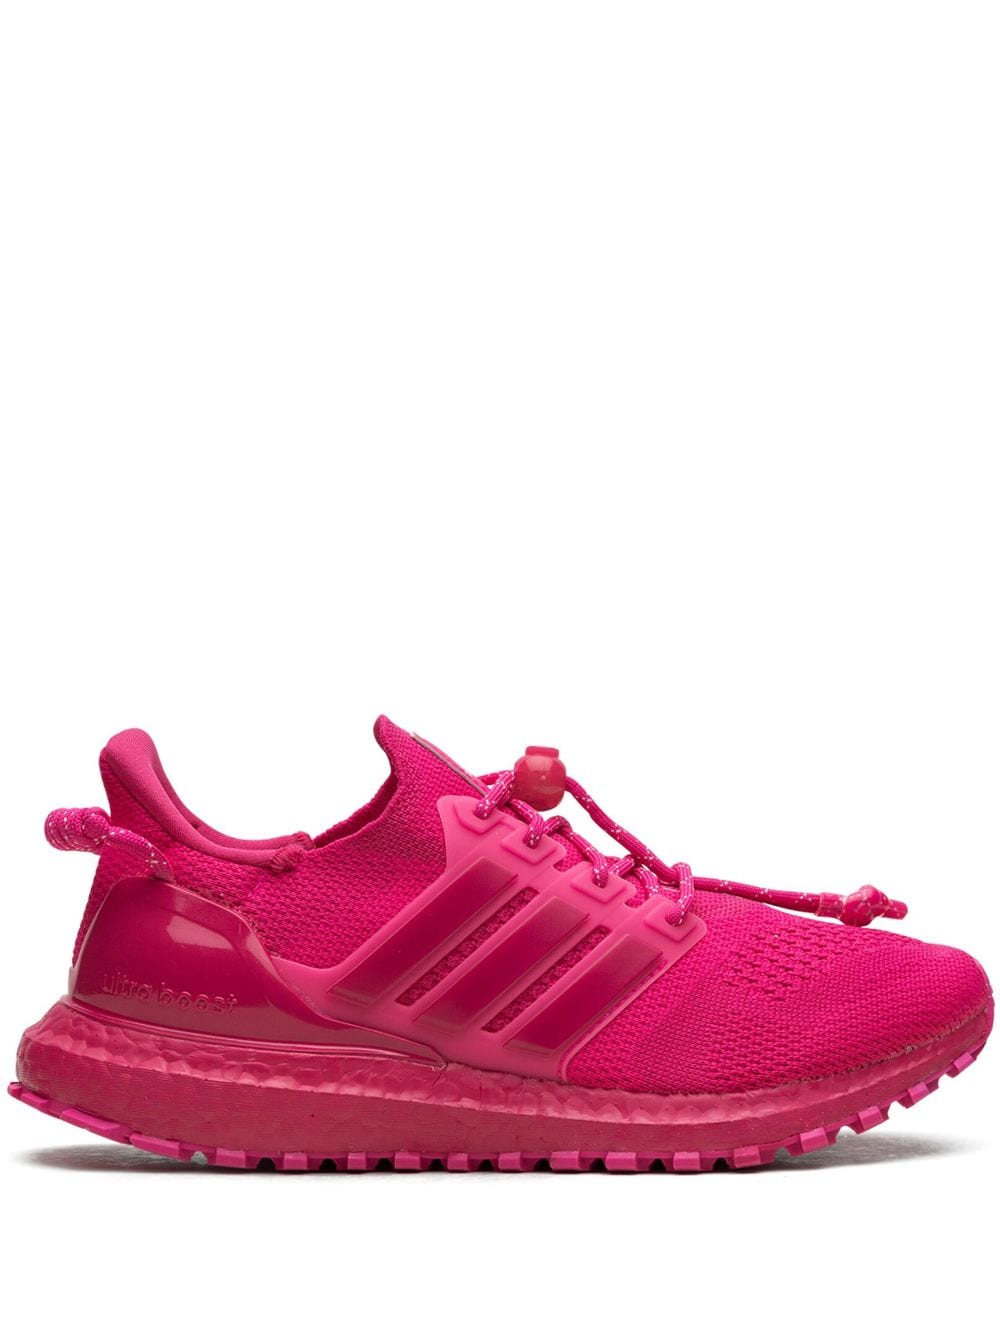 adidas x Ivy Park Ultra Boost OG "Ivy Heart" sneakers - Pink von adidas